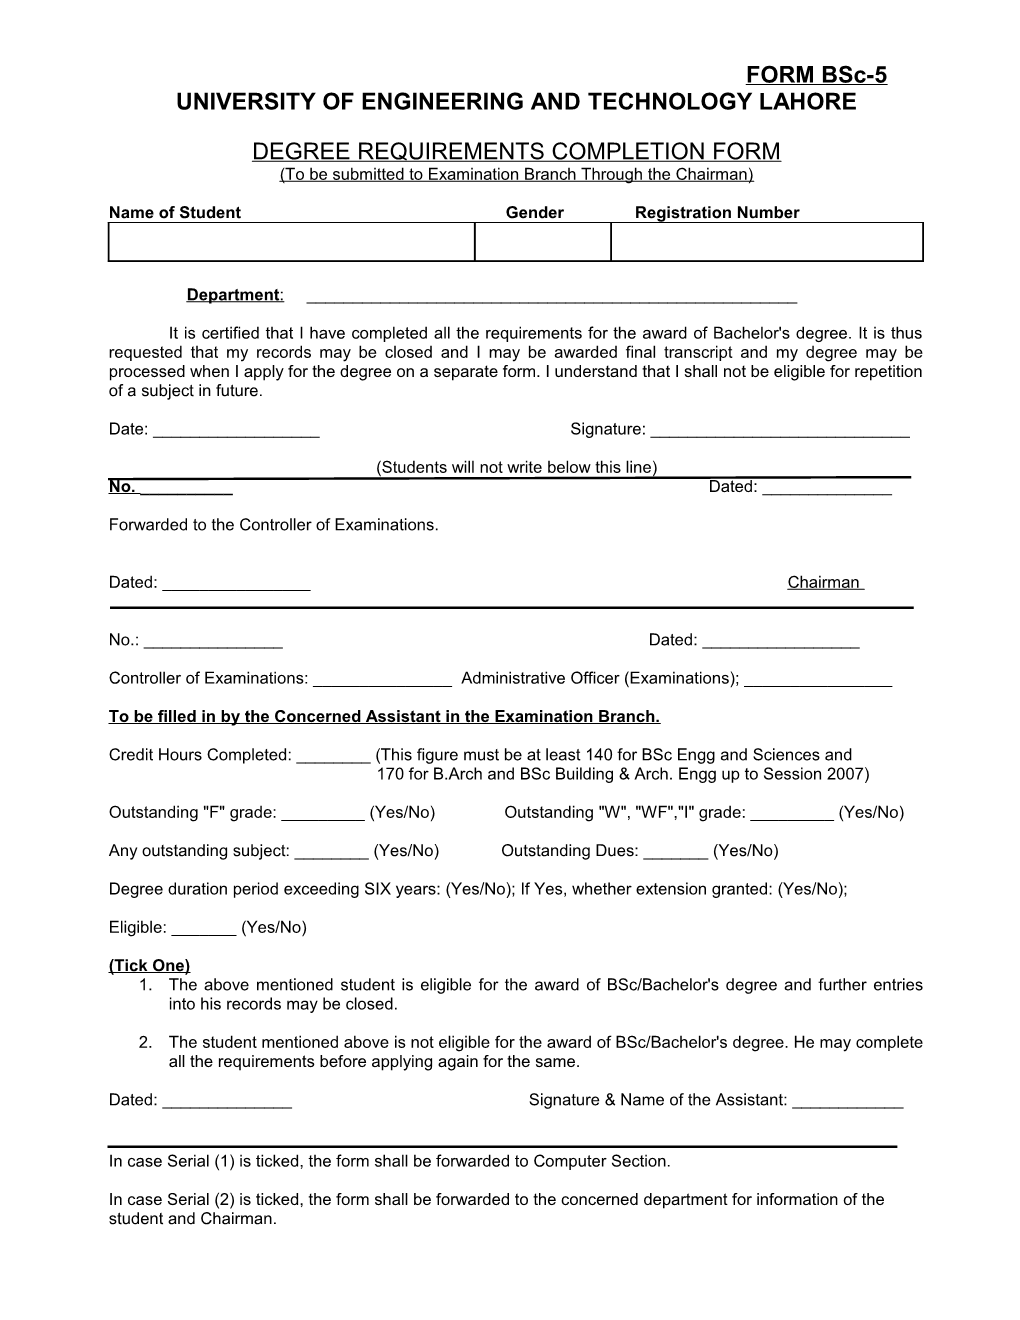 Degree Requirements Completion Form